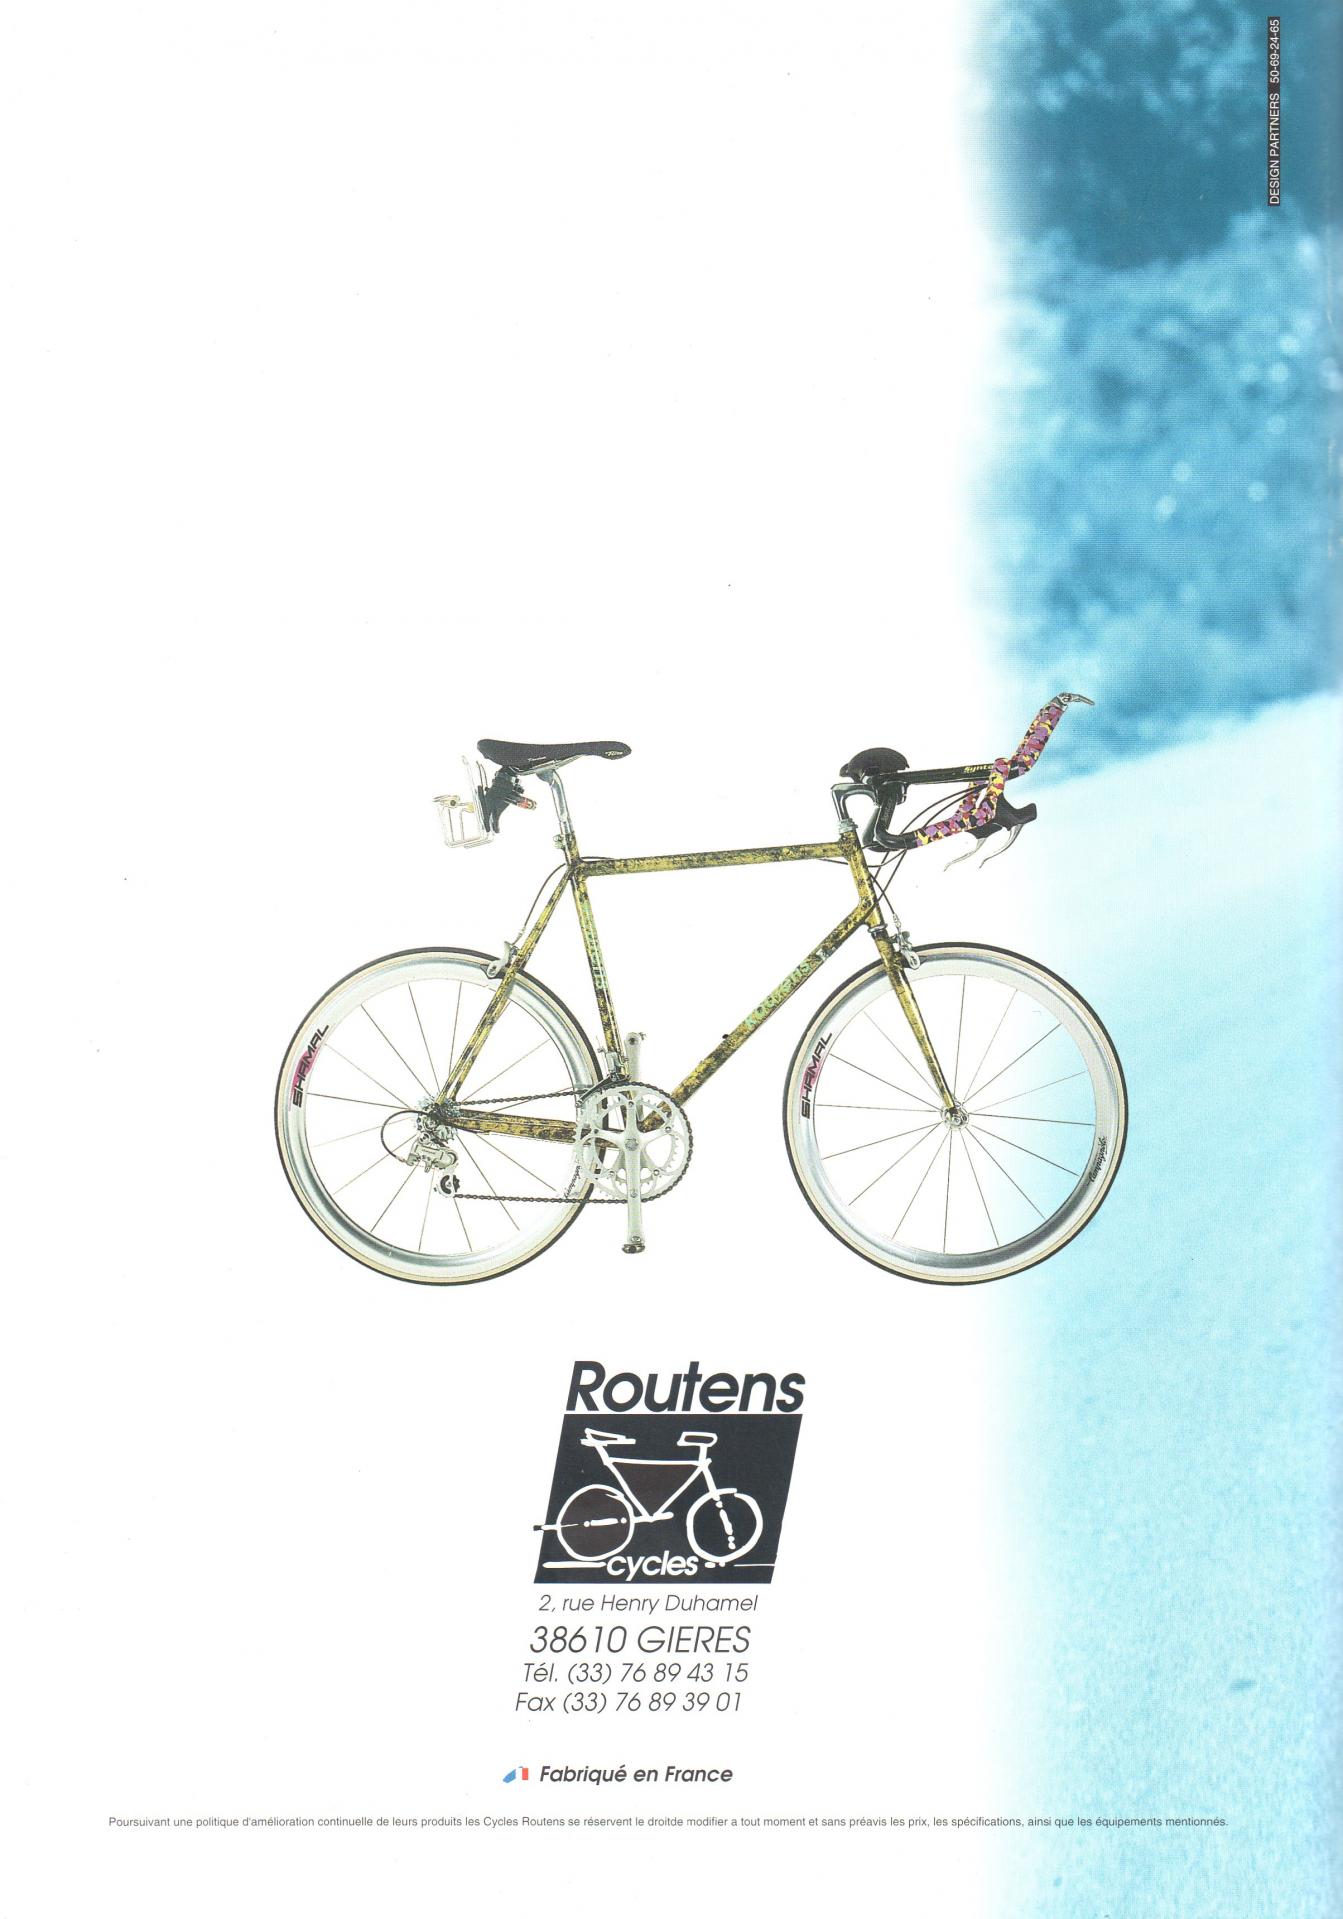 Routens cycles catalogue 1994 19